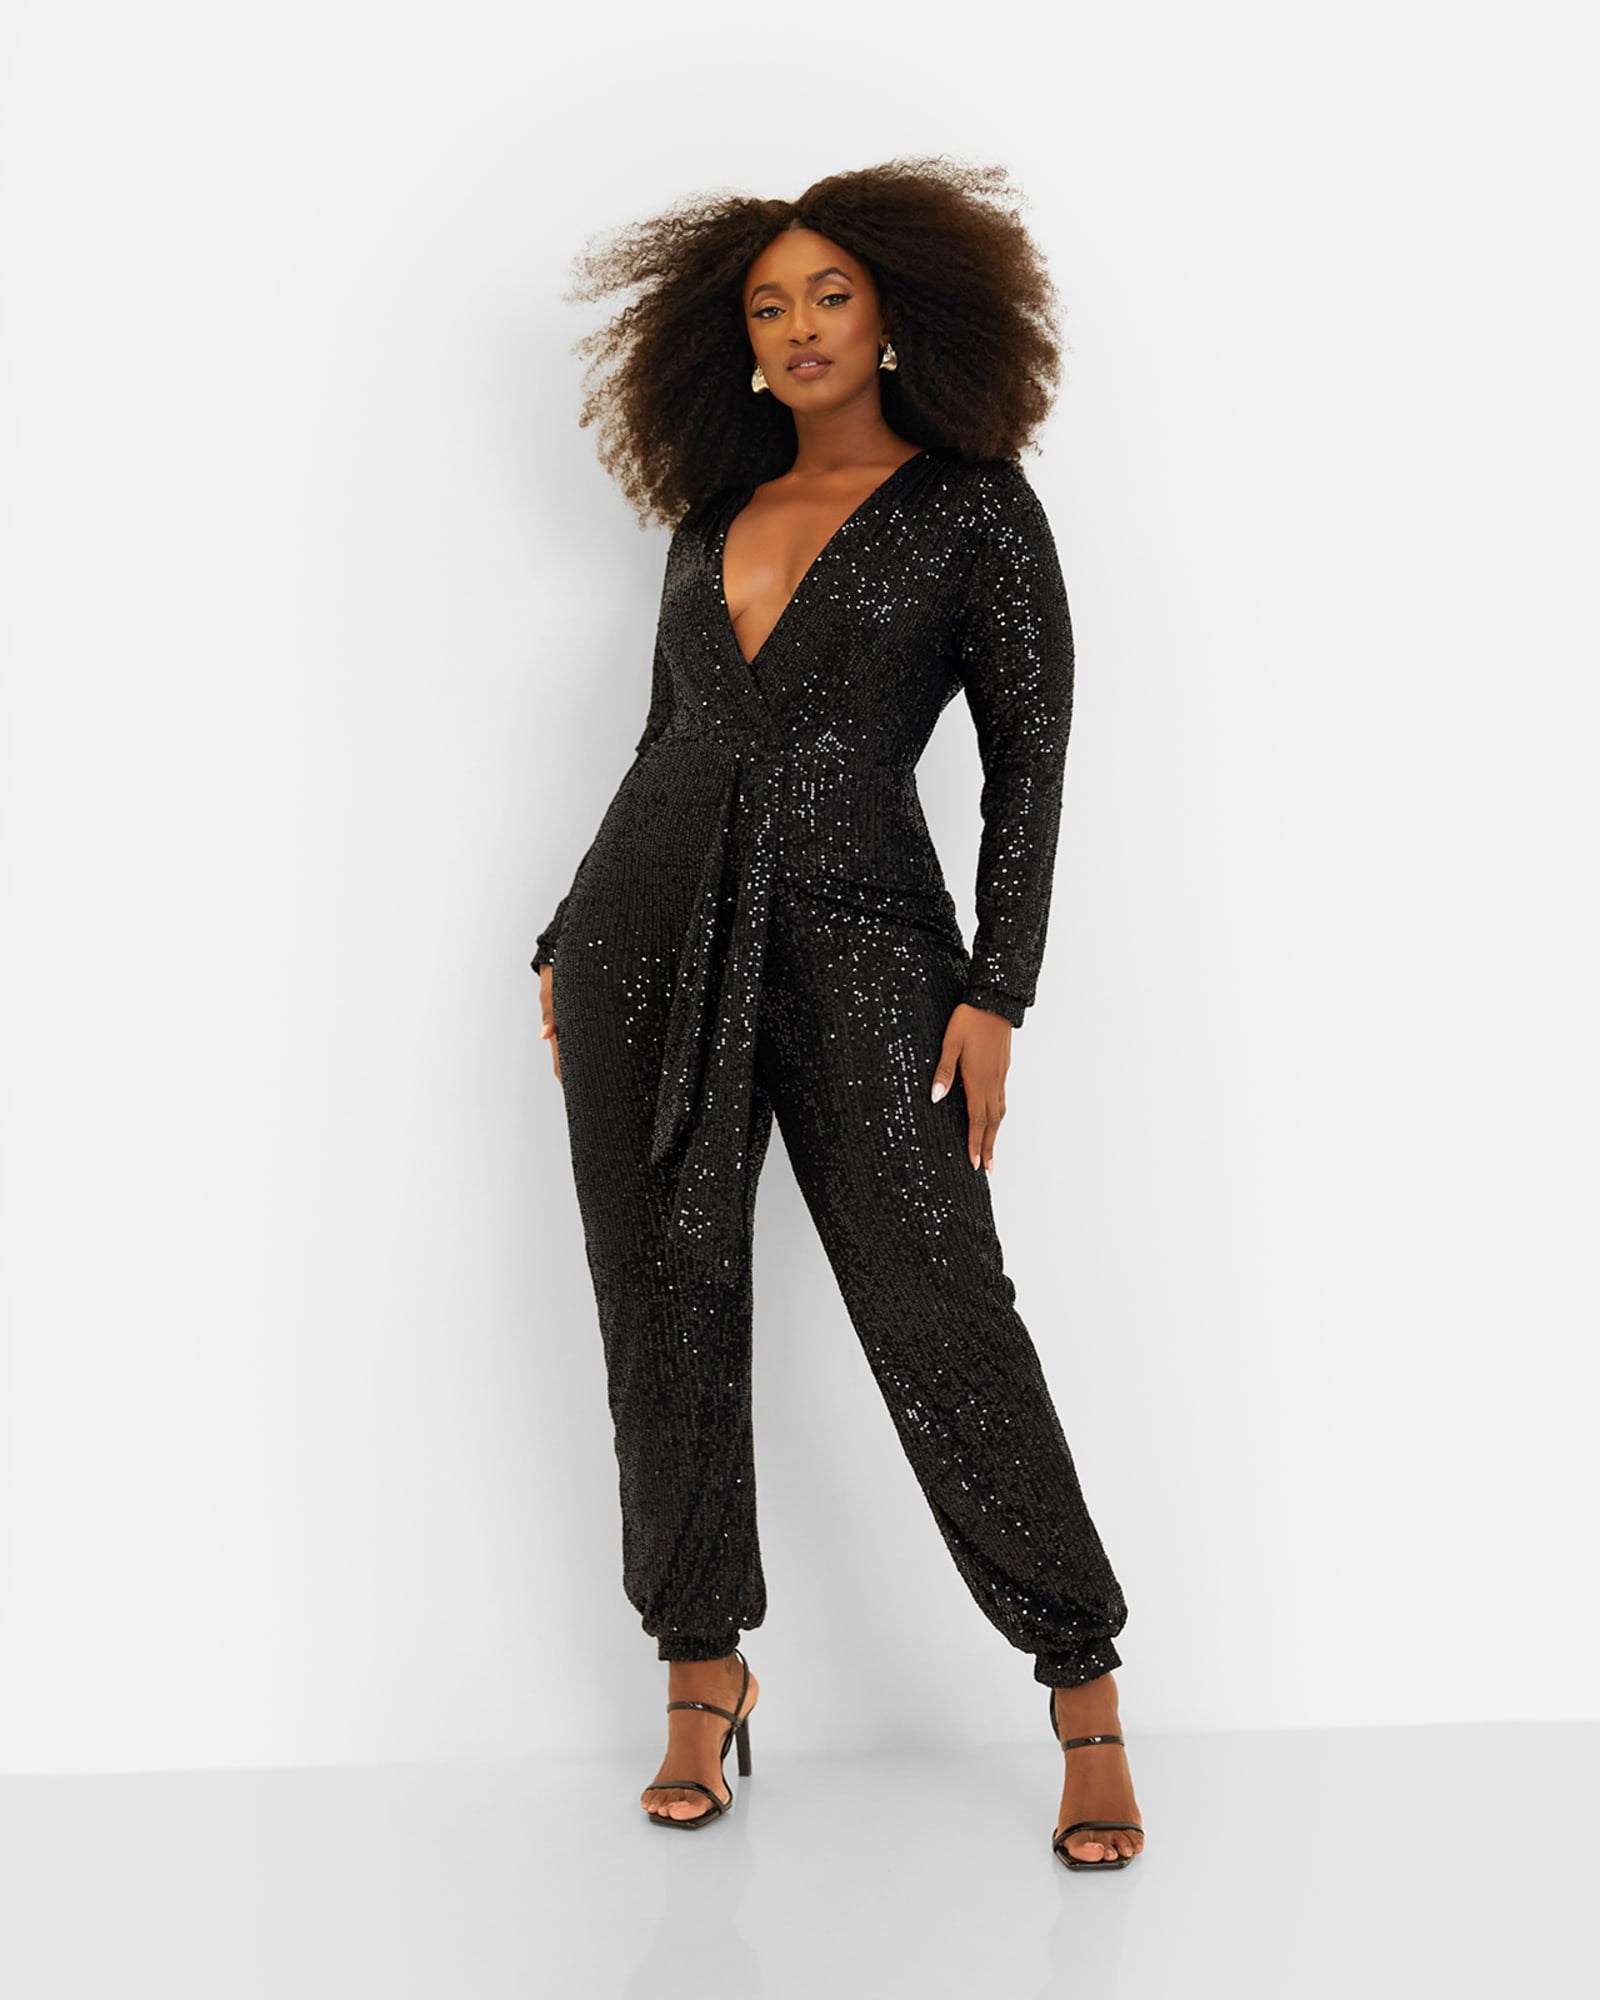 Long Sleeve Jumpsuits, Women's Jumpsuits With Sleeves